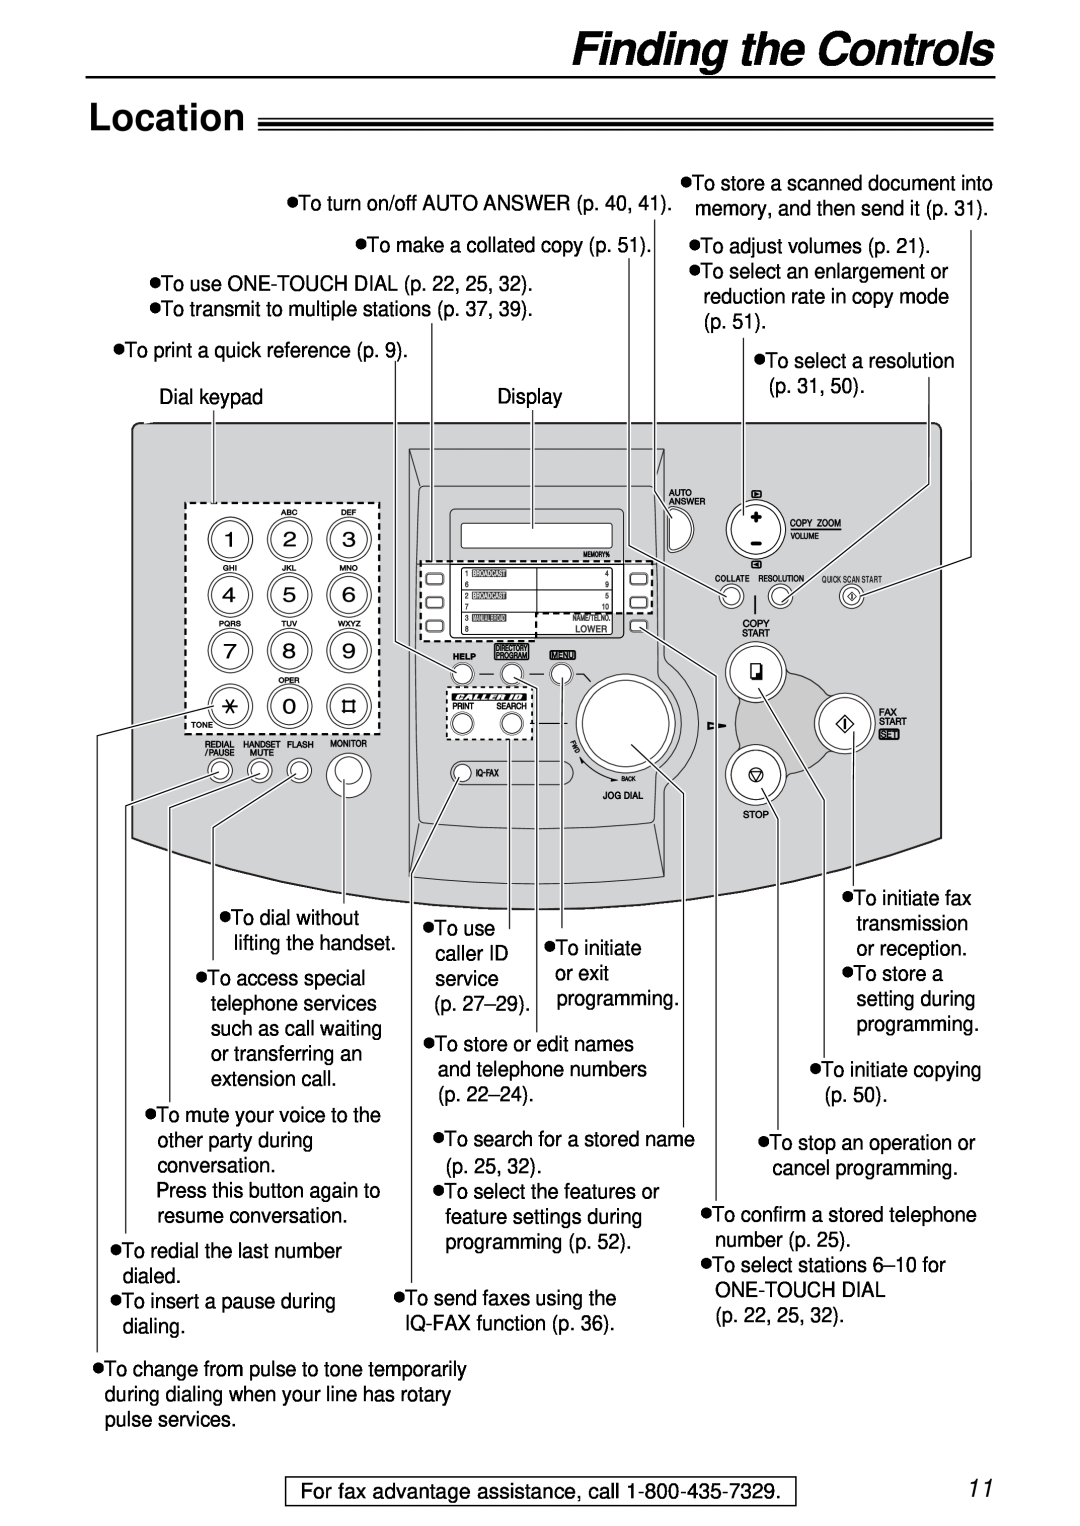 Panasonic KX-FL501 manual Location, Finding the Controls, reduction rate in copy mode, To select a resolution 